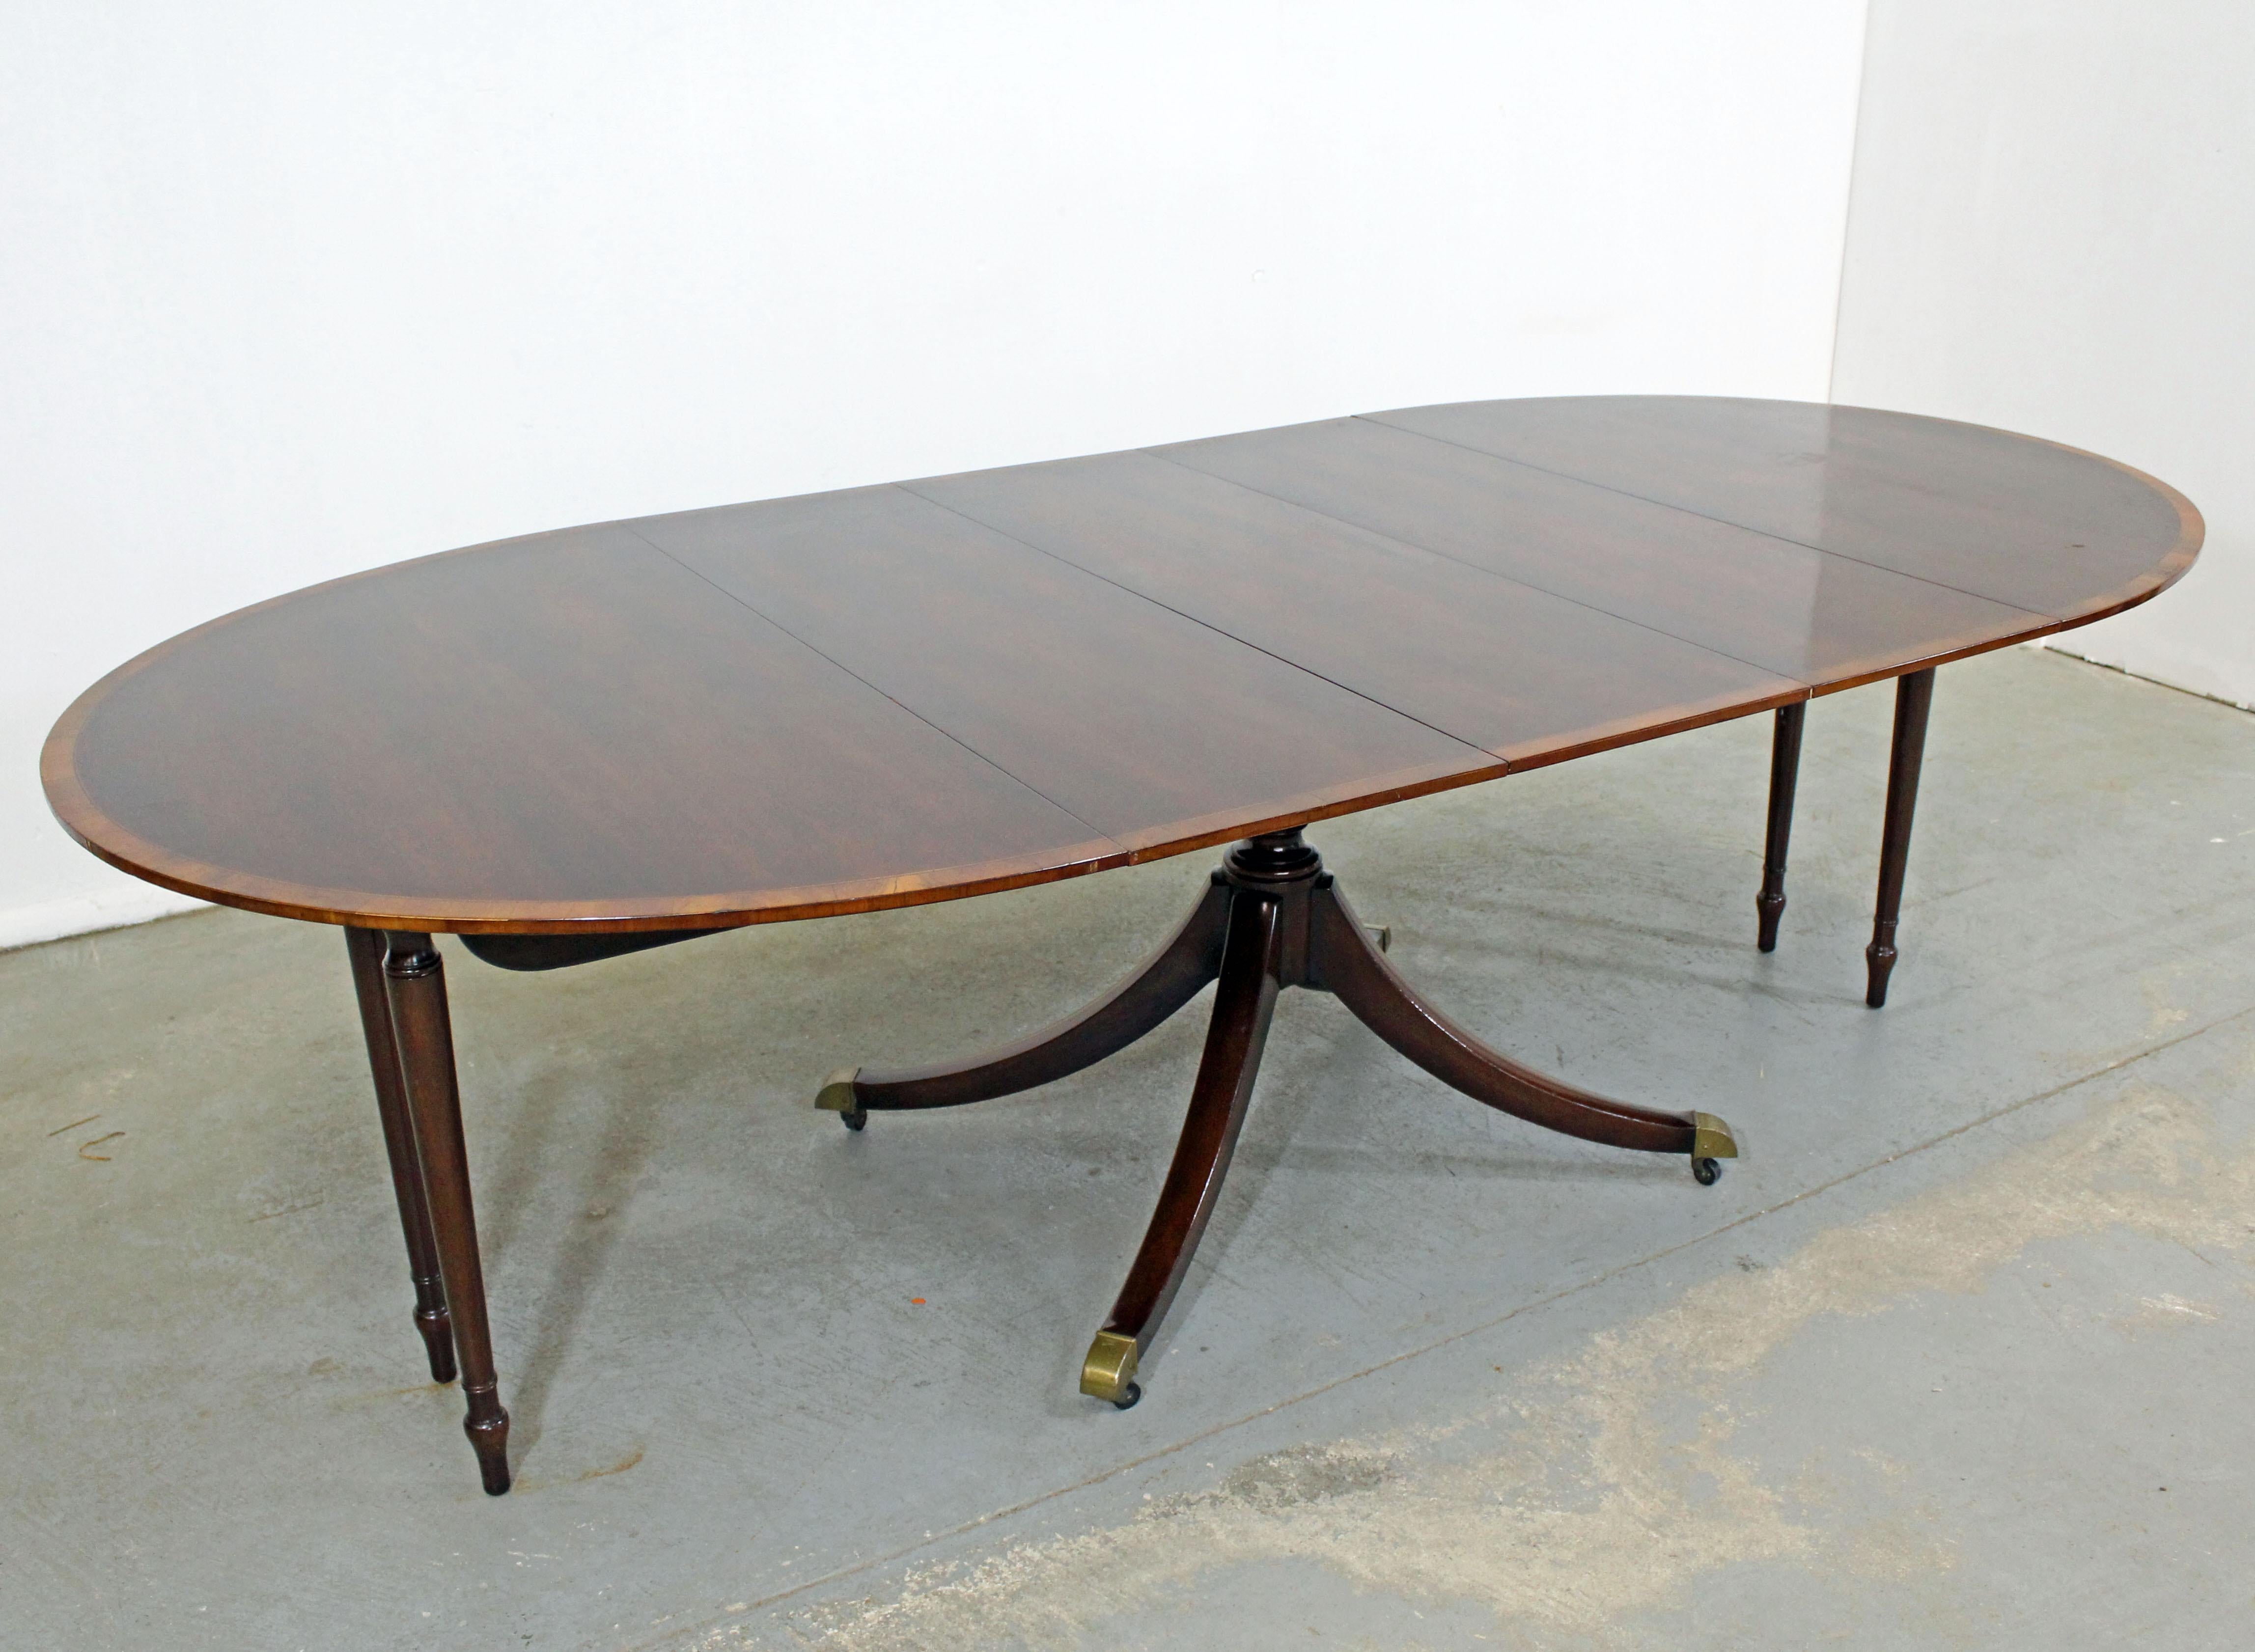 Offered is a beautiful Chippendale extendable cherry dining table with three table leaves. It is made of cherry with banded mahogany and features a pedestal base and legs that come out when fully extended. It is in excellent condition for its age,